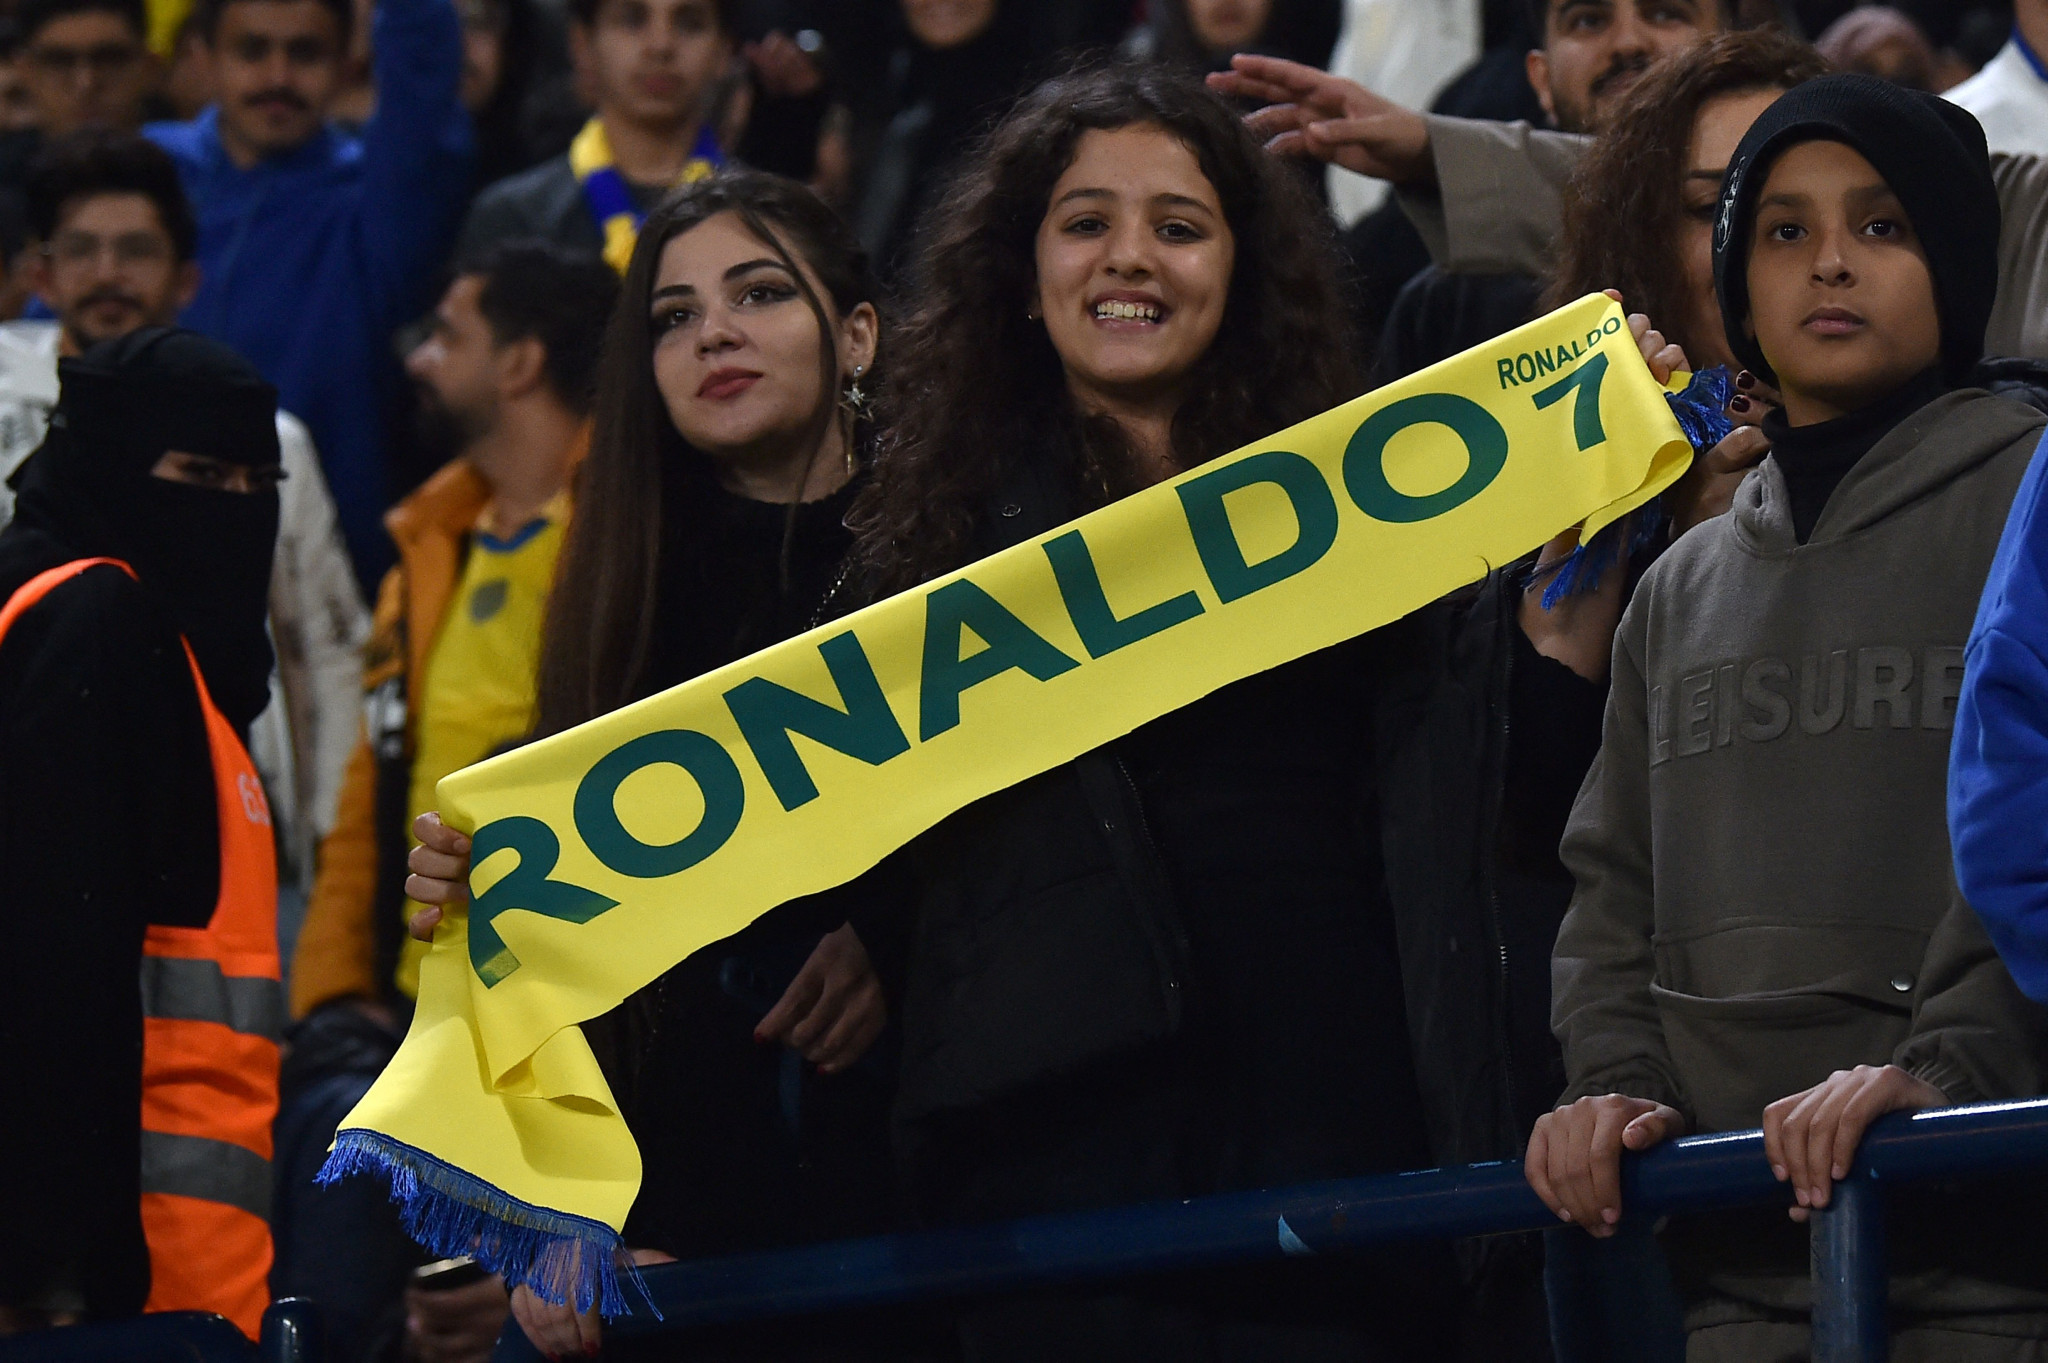 Women spectators will be allowed to watch Cristiano Ronaldo's debut against Paris Saint-Germain, but Saudi Arabia continues to face accusations of 